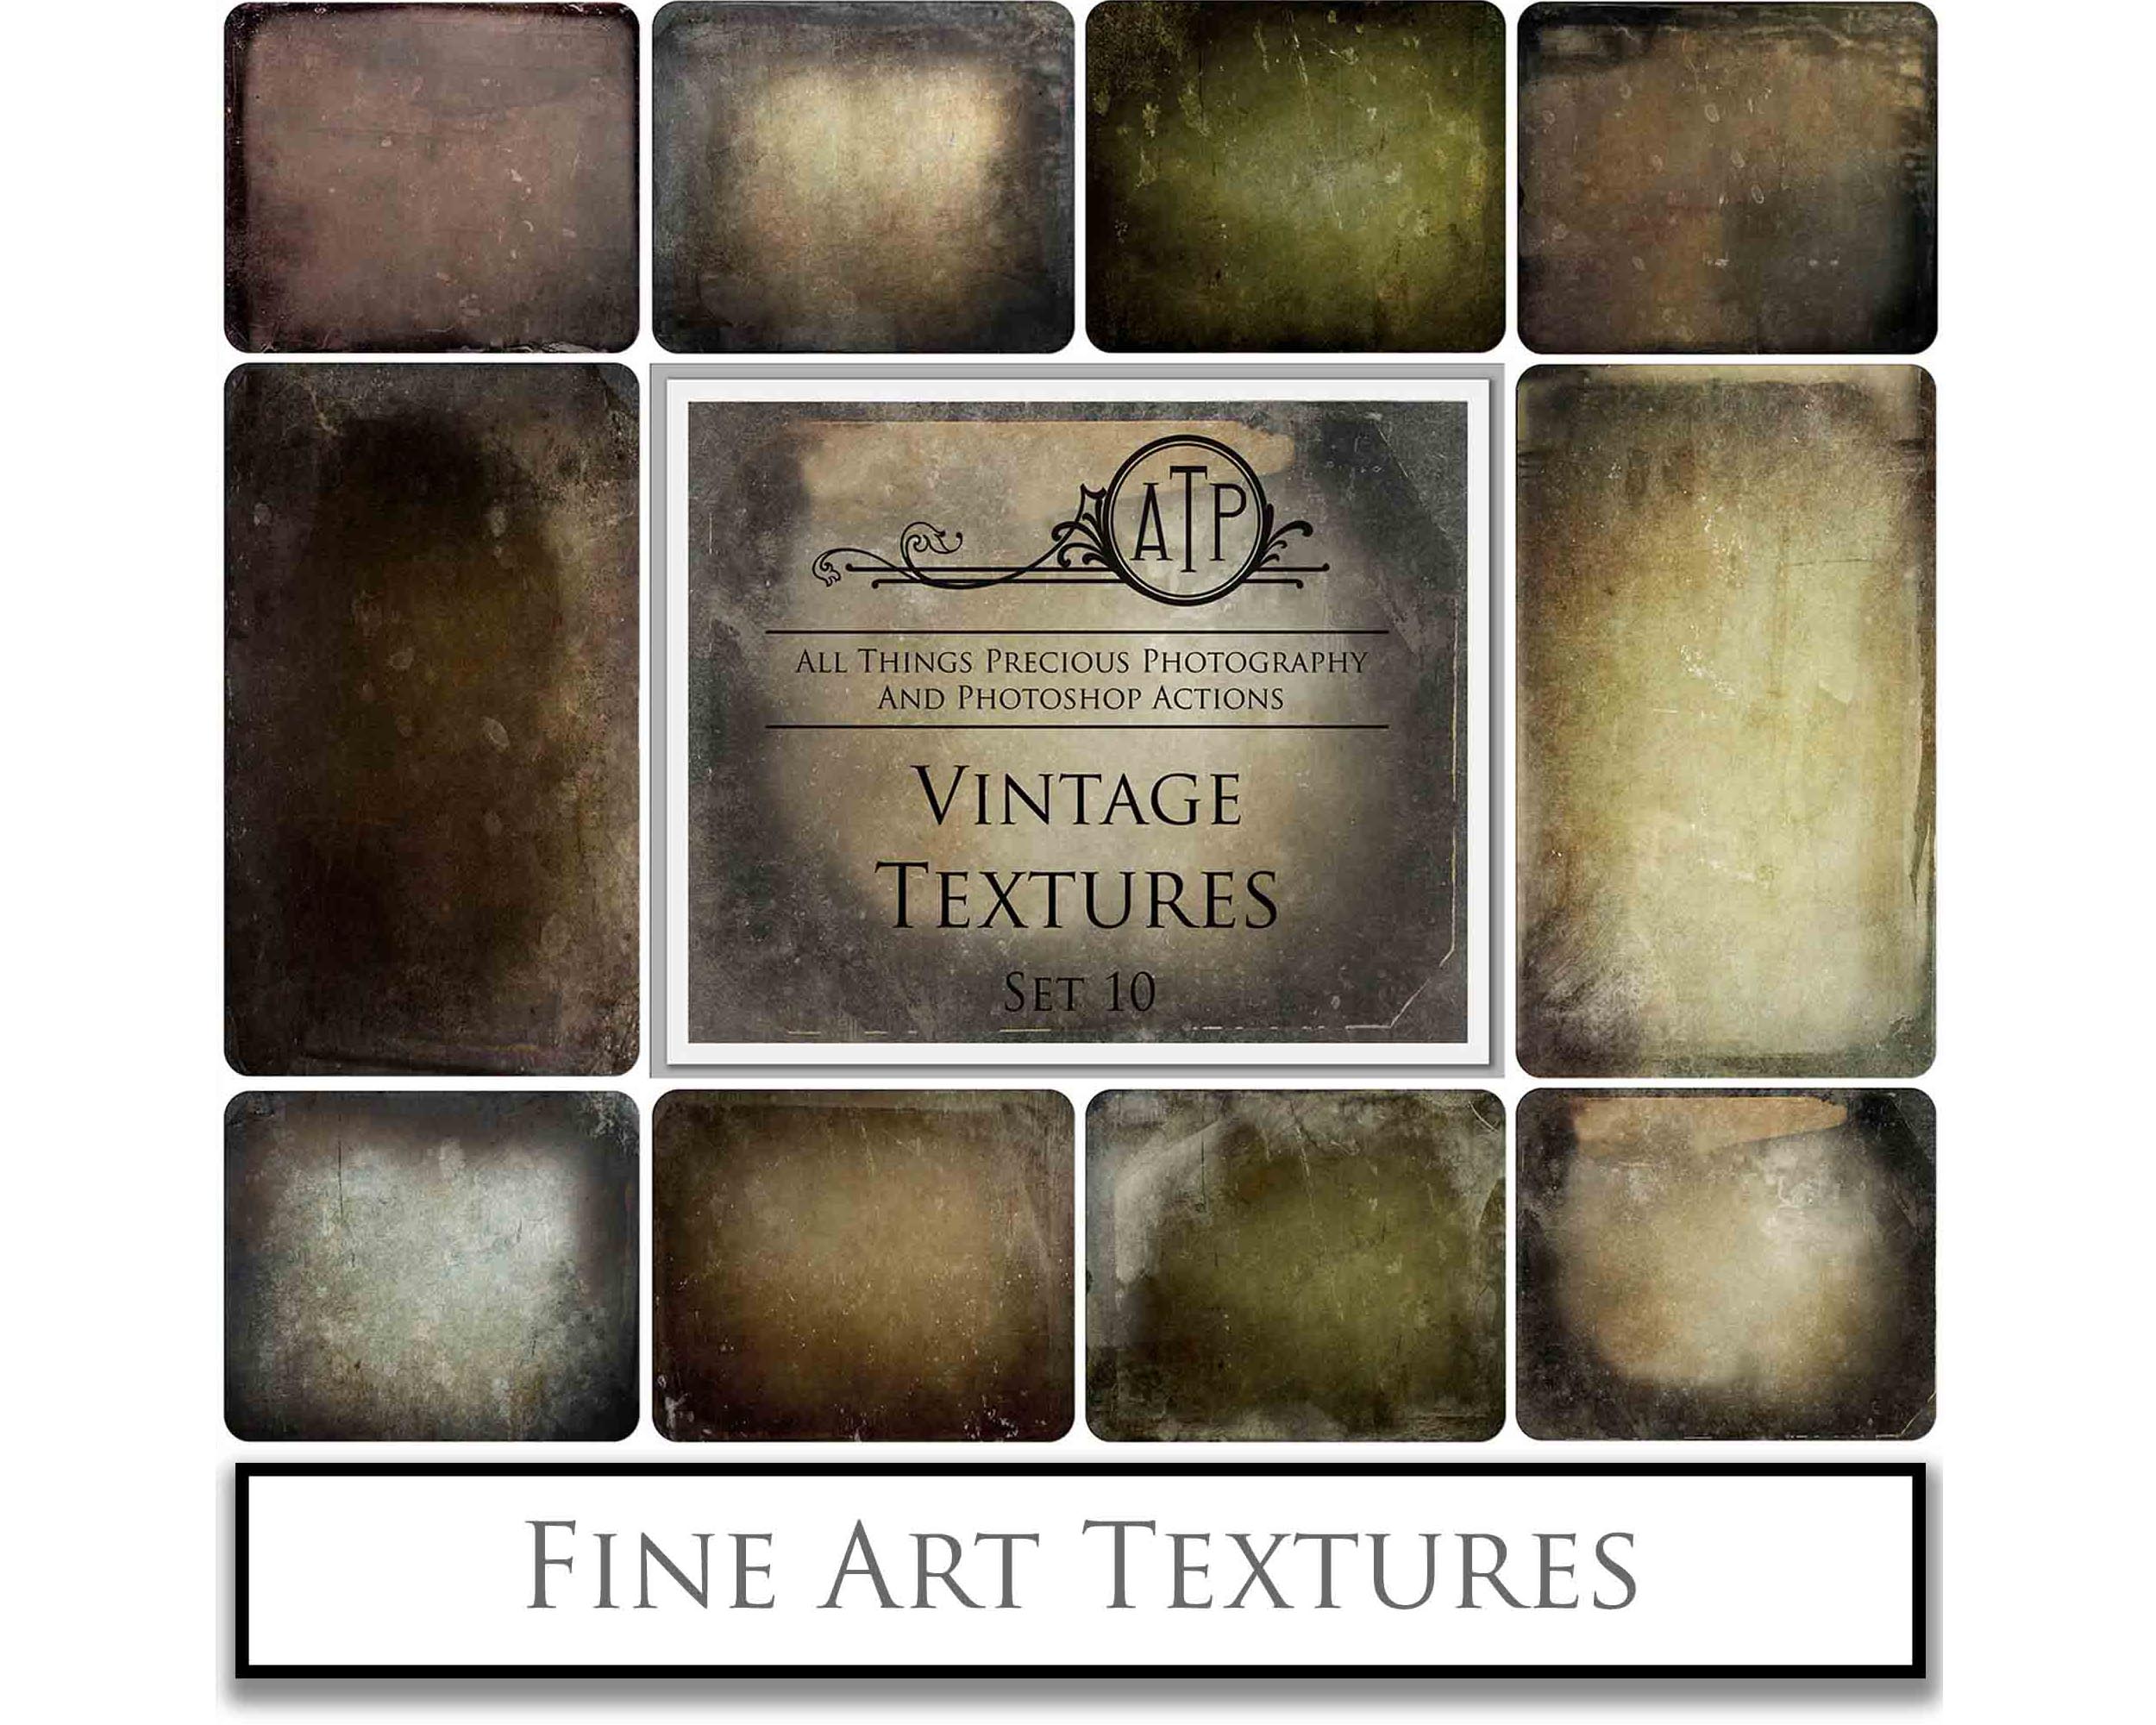 Vintage aged textures. Sweet Textures. Fine art texture for photographers, digital editing. Photo Overlays. Antique, Old World, Grunge, Light, Bundle. Textured printable Canvas, Colour, black and white, Bundle. High resolution, 300dpi Graphic Assets for photography, digital scrapbooking and design. By ATP Textures